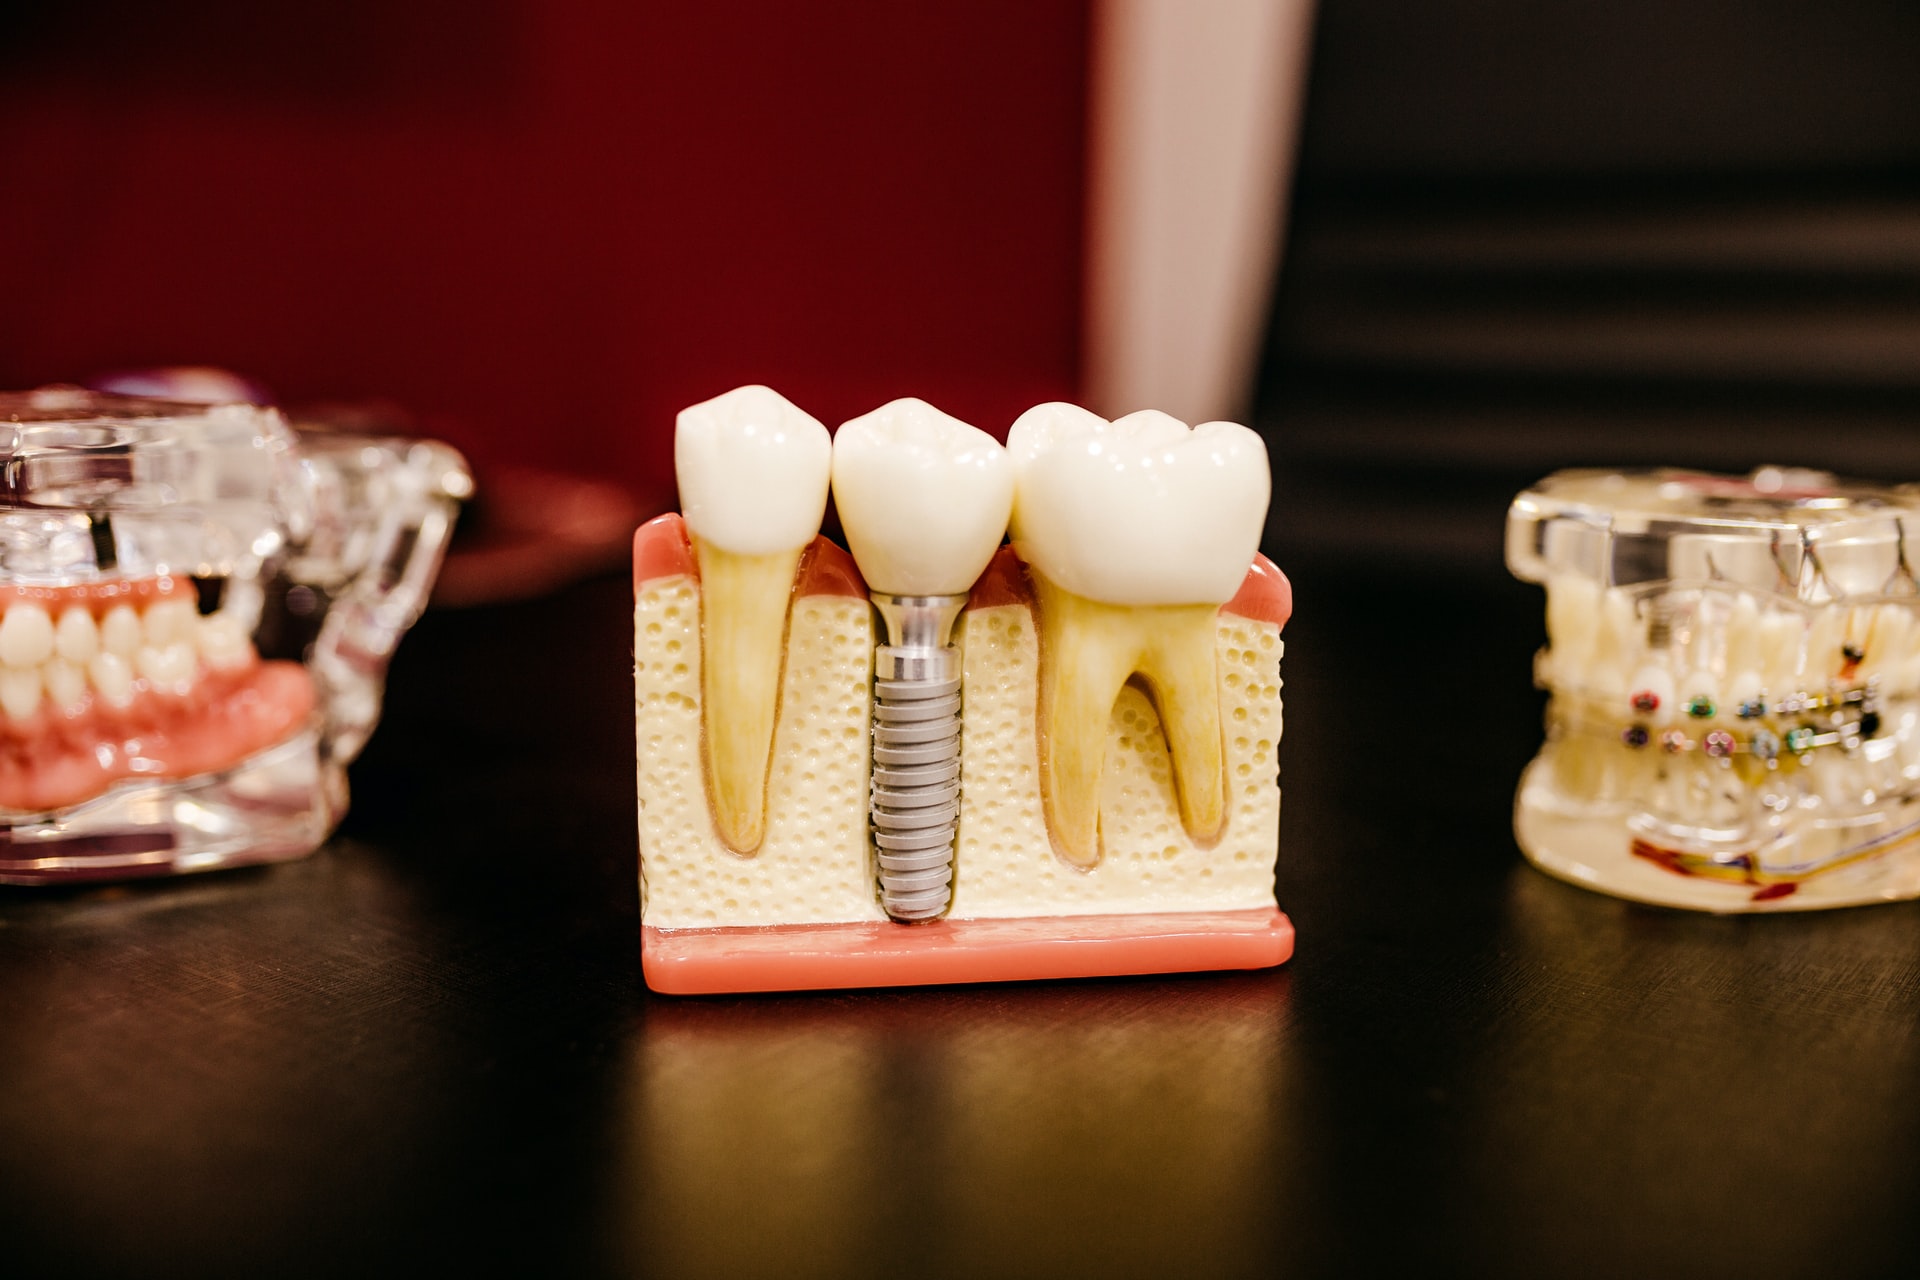 Does Medicaid Cover Dental Implants?